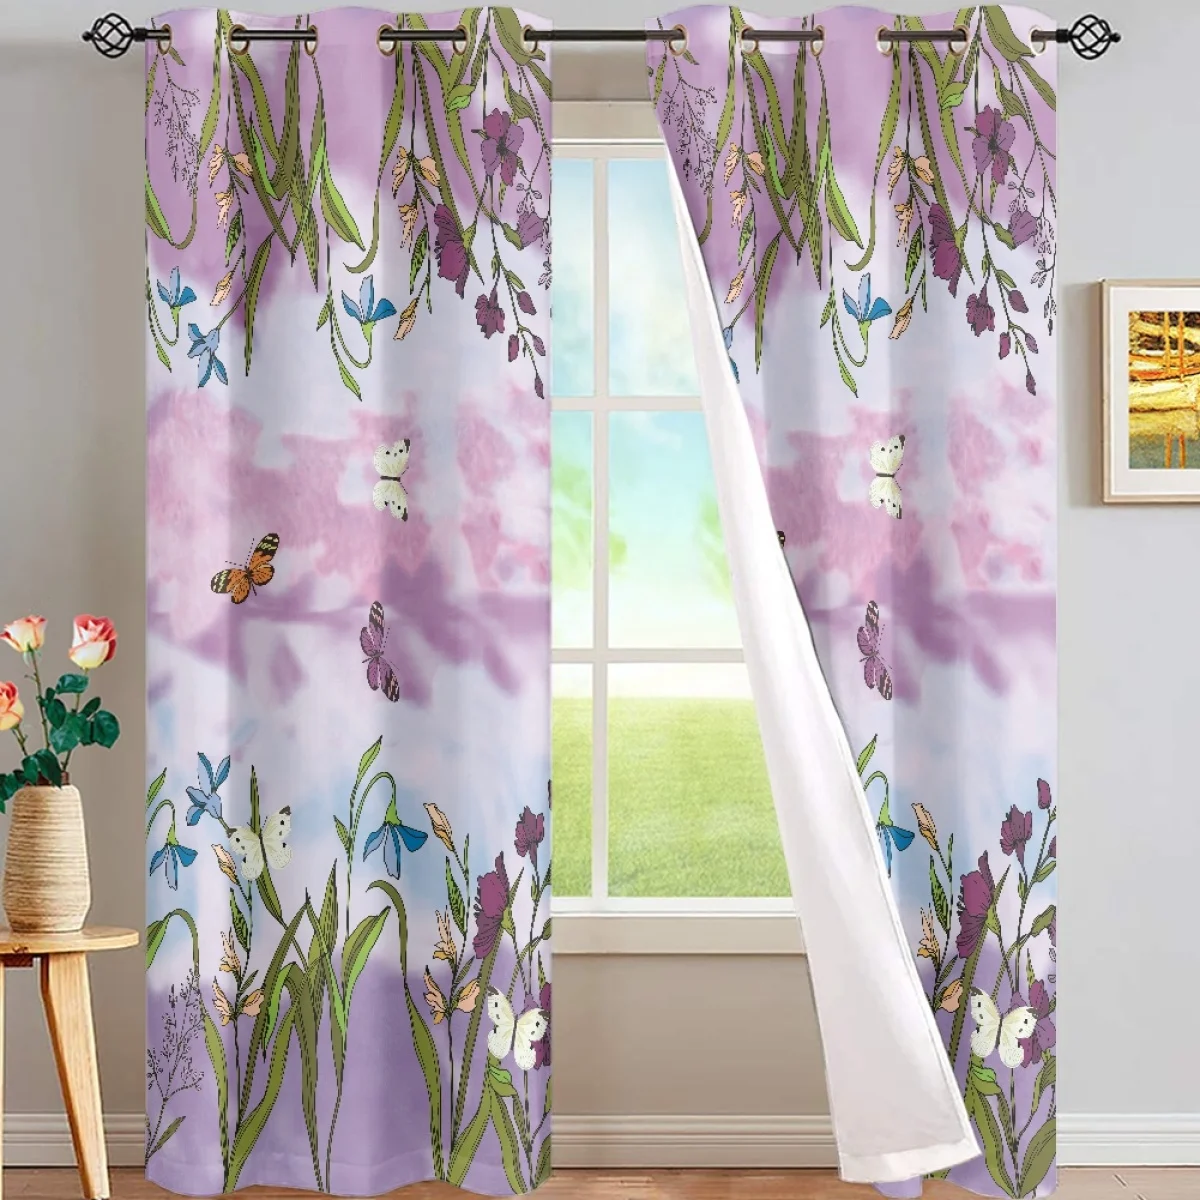 

Thermal Transfer Printing Process Fully Shaded High Quality Materials Silk Satin Fabric Drapes Hotel Apartment Bathroom Curtains